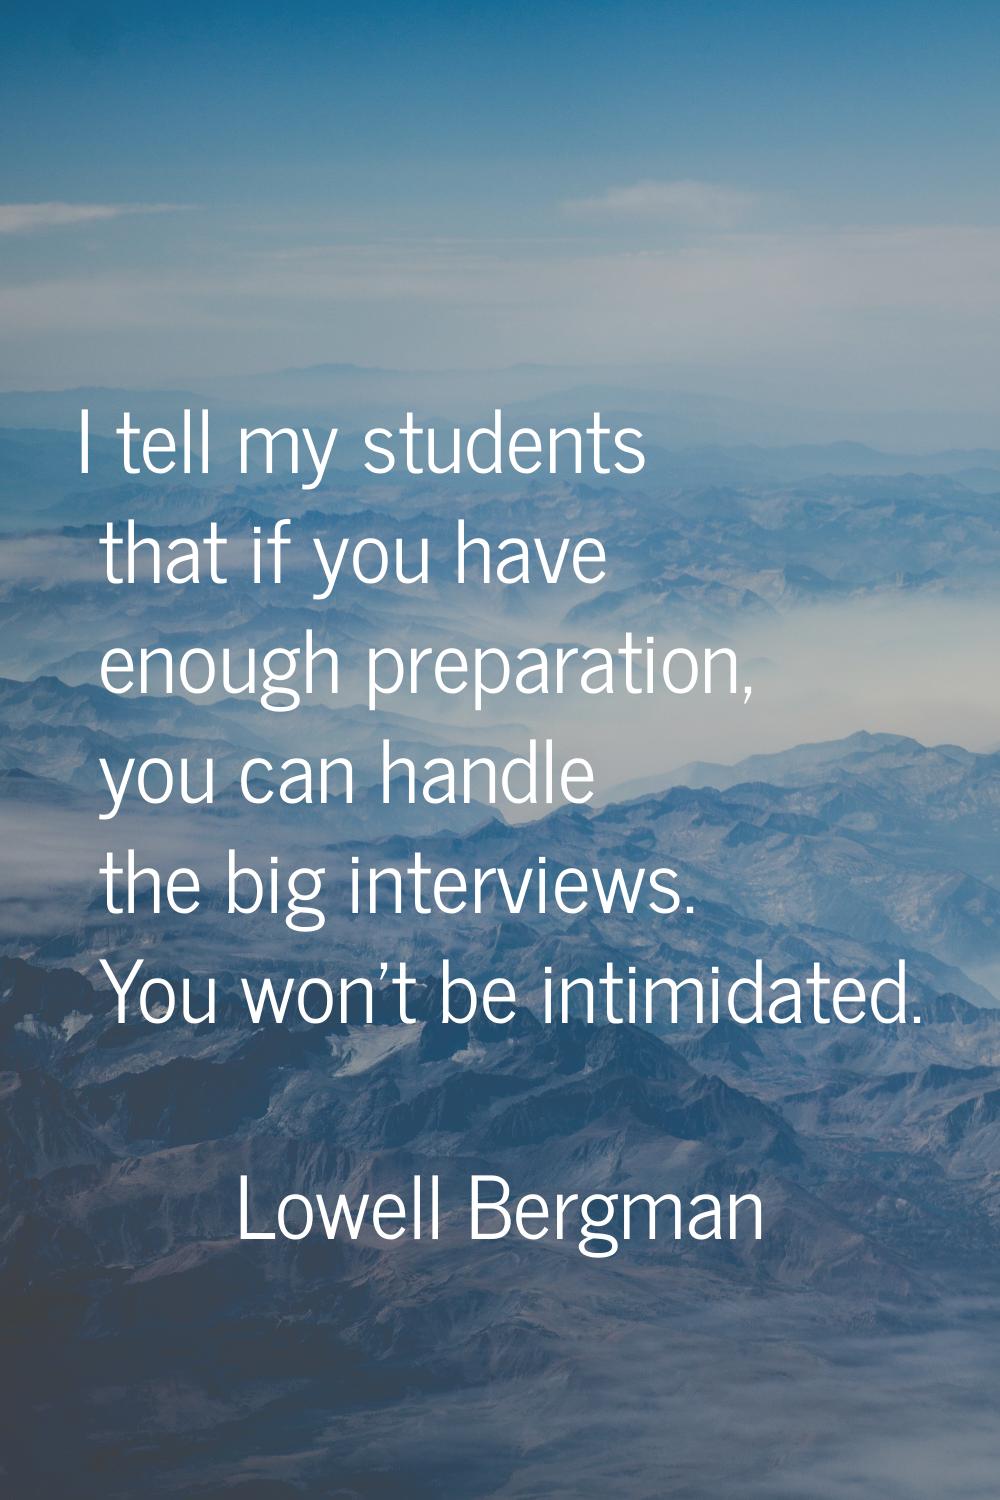 I tell my students that if you have enough preparation, you can handle the big interviews. You won'